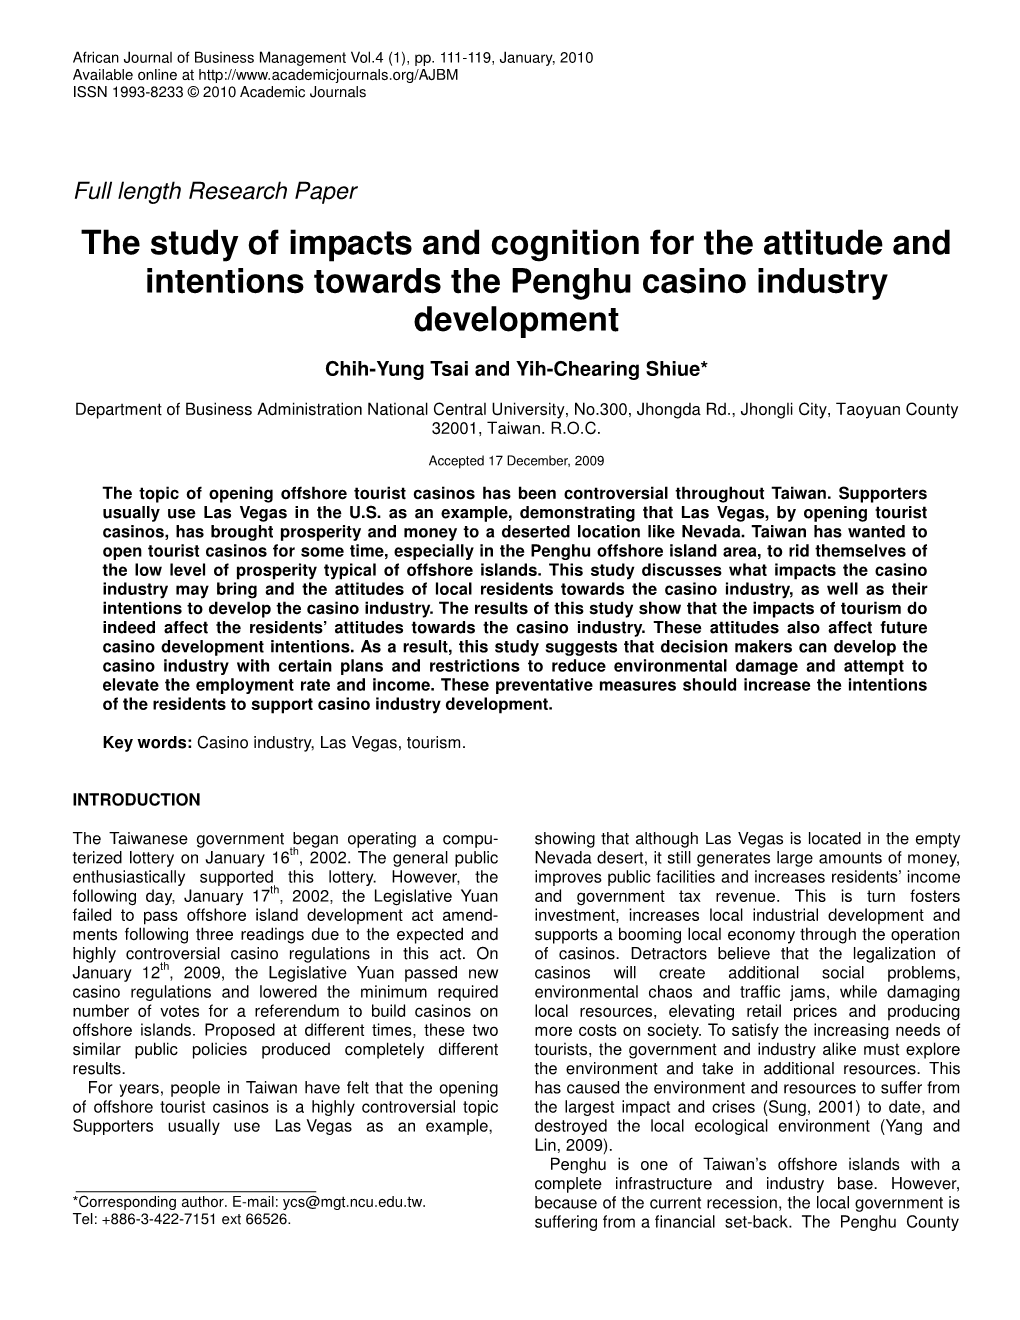 The Study of Impacts and Cognition for the Attitude and Intentions Towards the Penghu Casino Industry Development